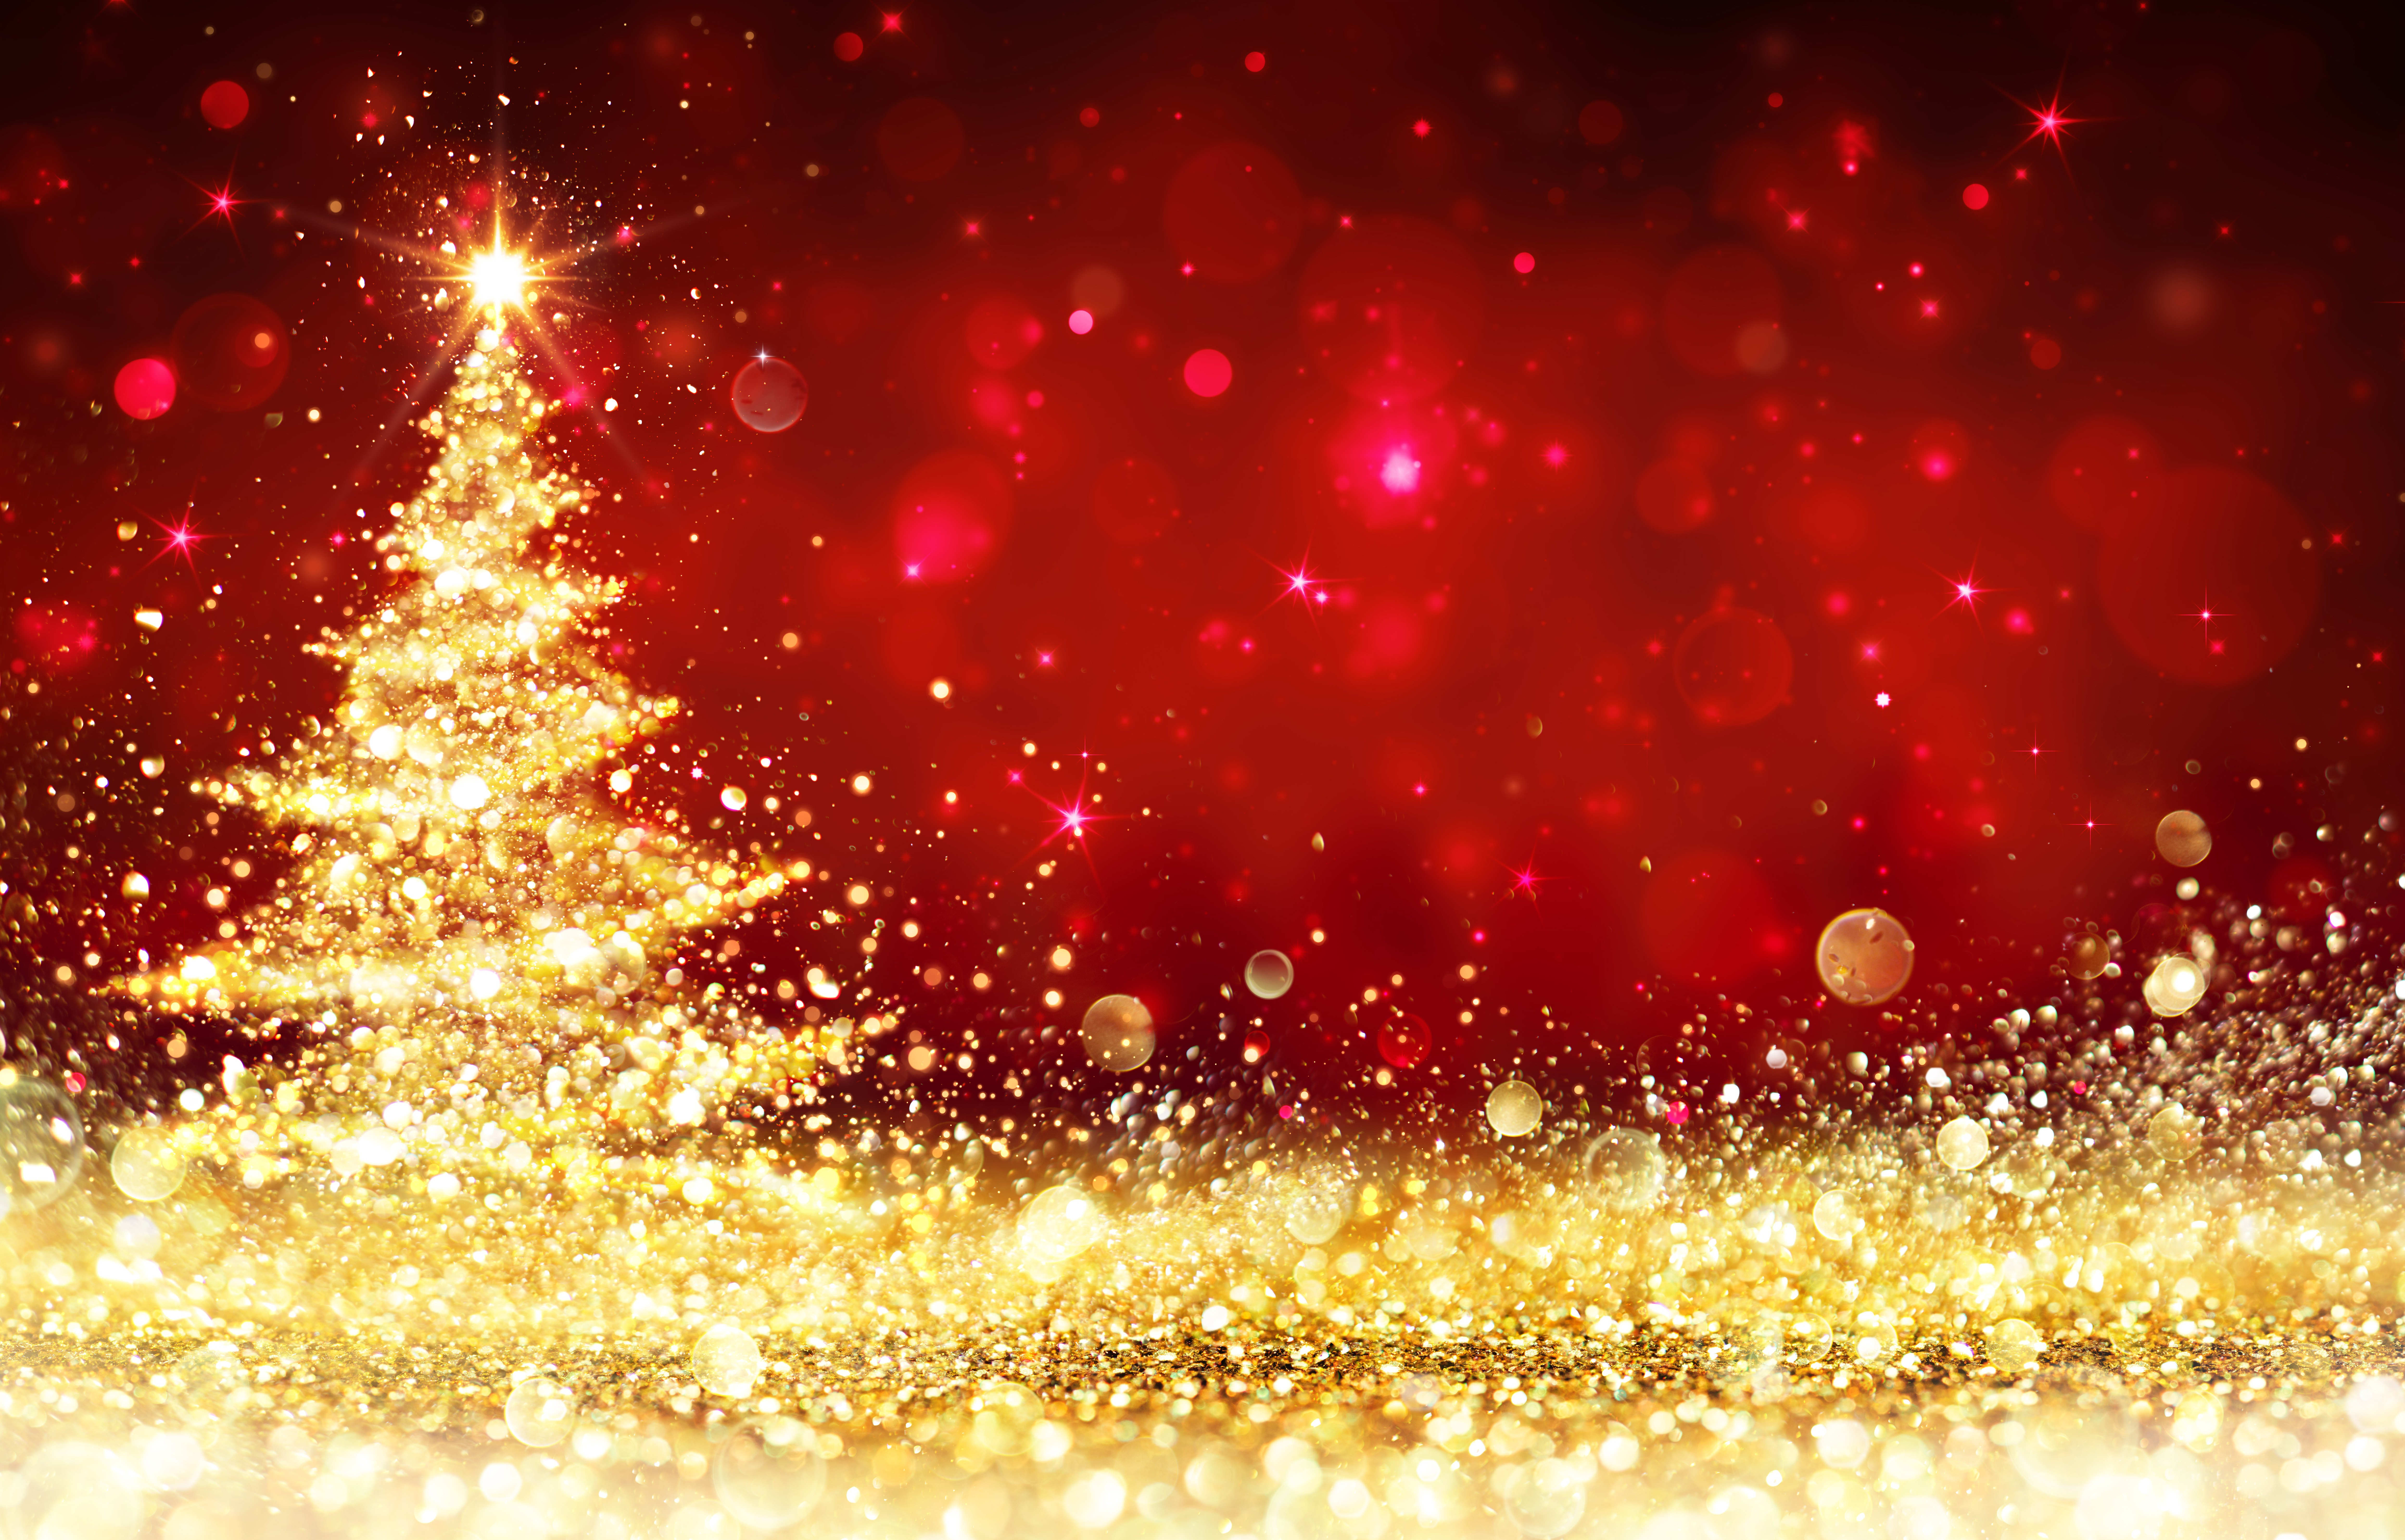 10619x6802px christmas picture free for desktop by Talon Walls Gallery HD Wallpaper